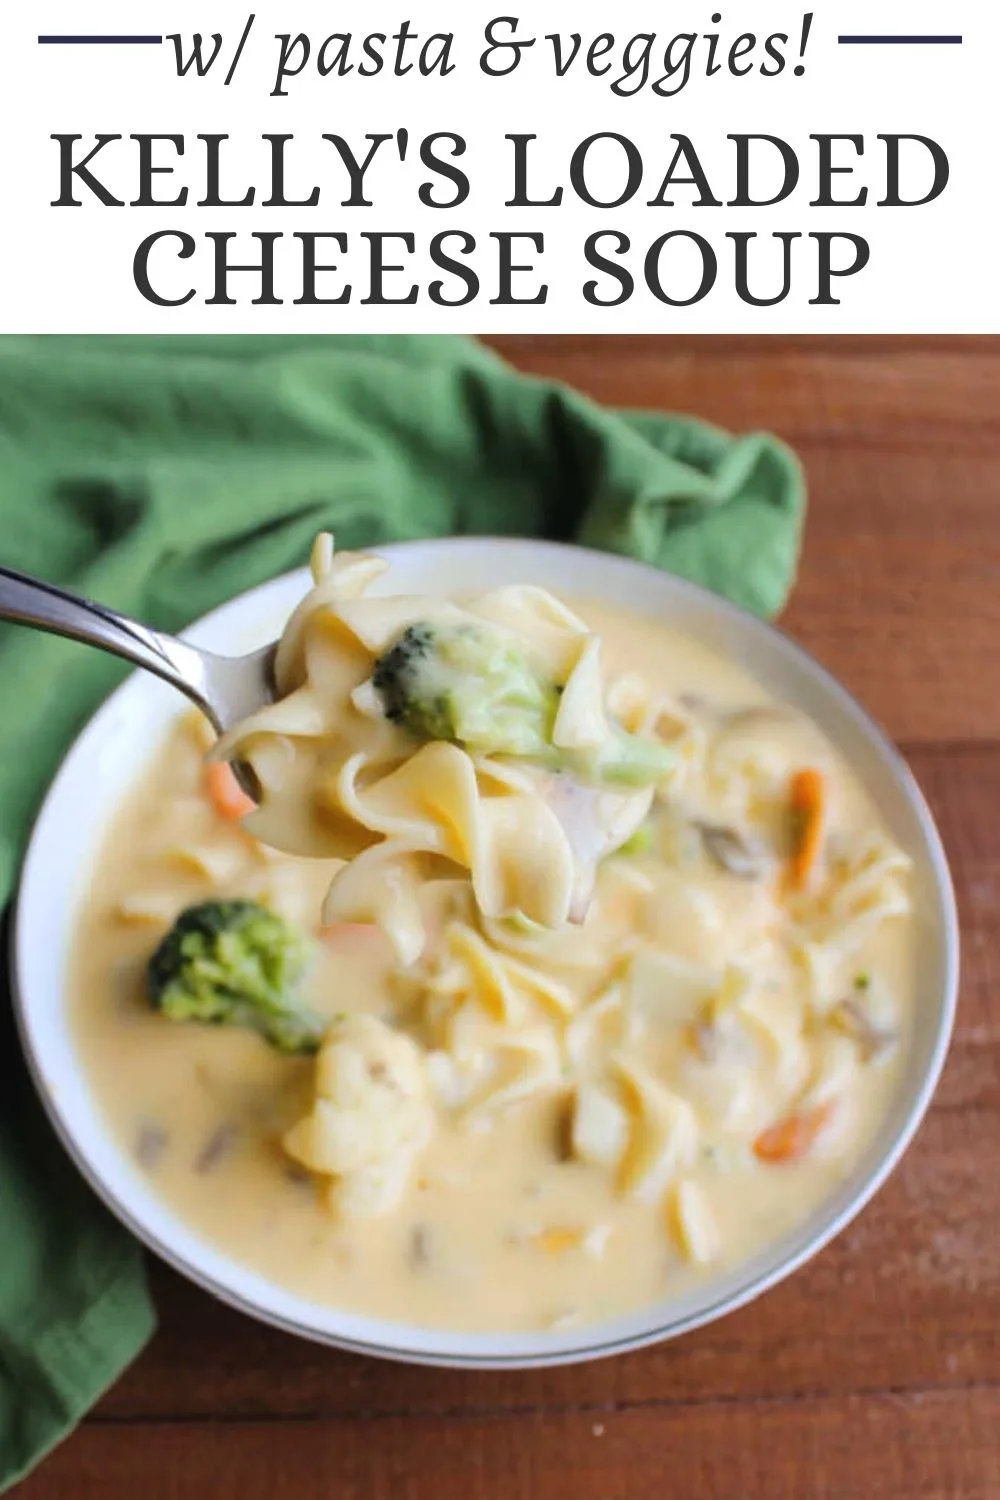 This cheese soup is the ultimate in comfort food. It is super creamy and really delicious. Plus it is loaded with cauliflower, broccoli and carrots. The pasta makes for a really nice addition, it is almost like macaroni and cheese in a full meal soup kind of form. Let me tell you, it is a favorite around here.